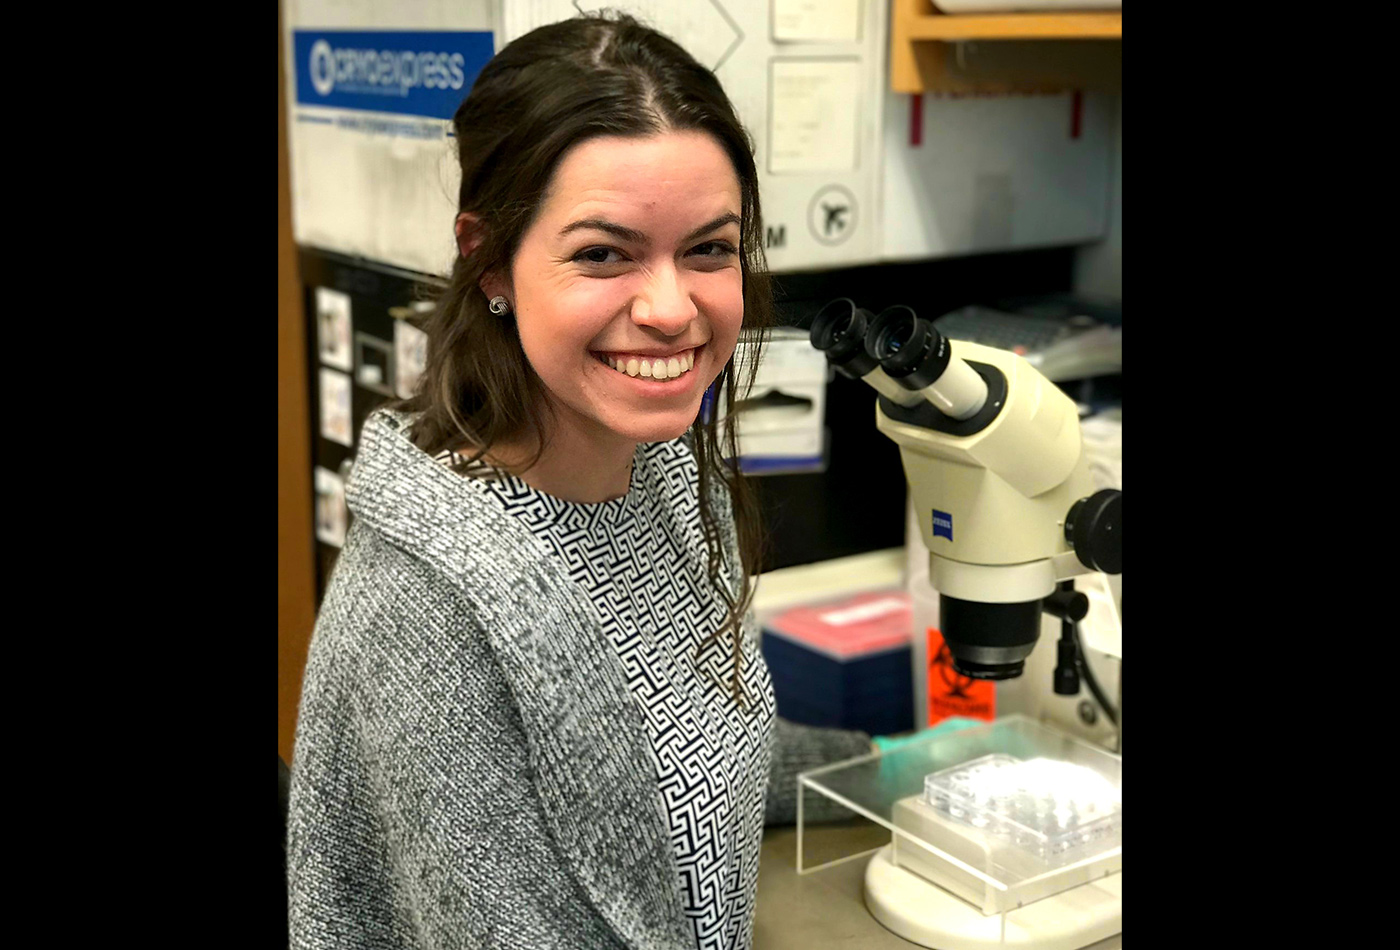 A female graduate student smiles while sitting at a microscope